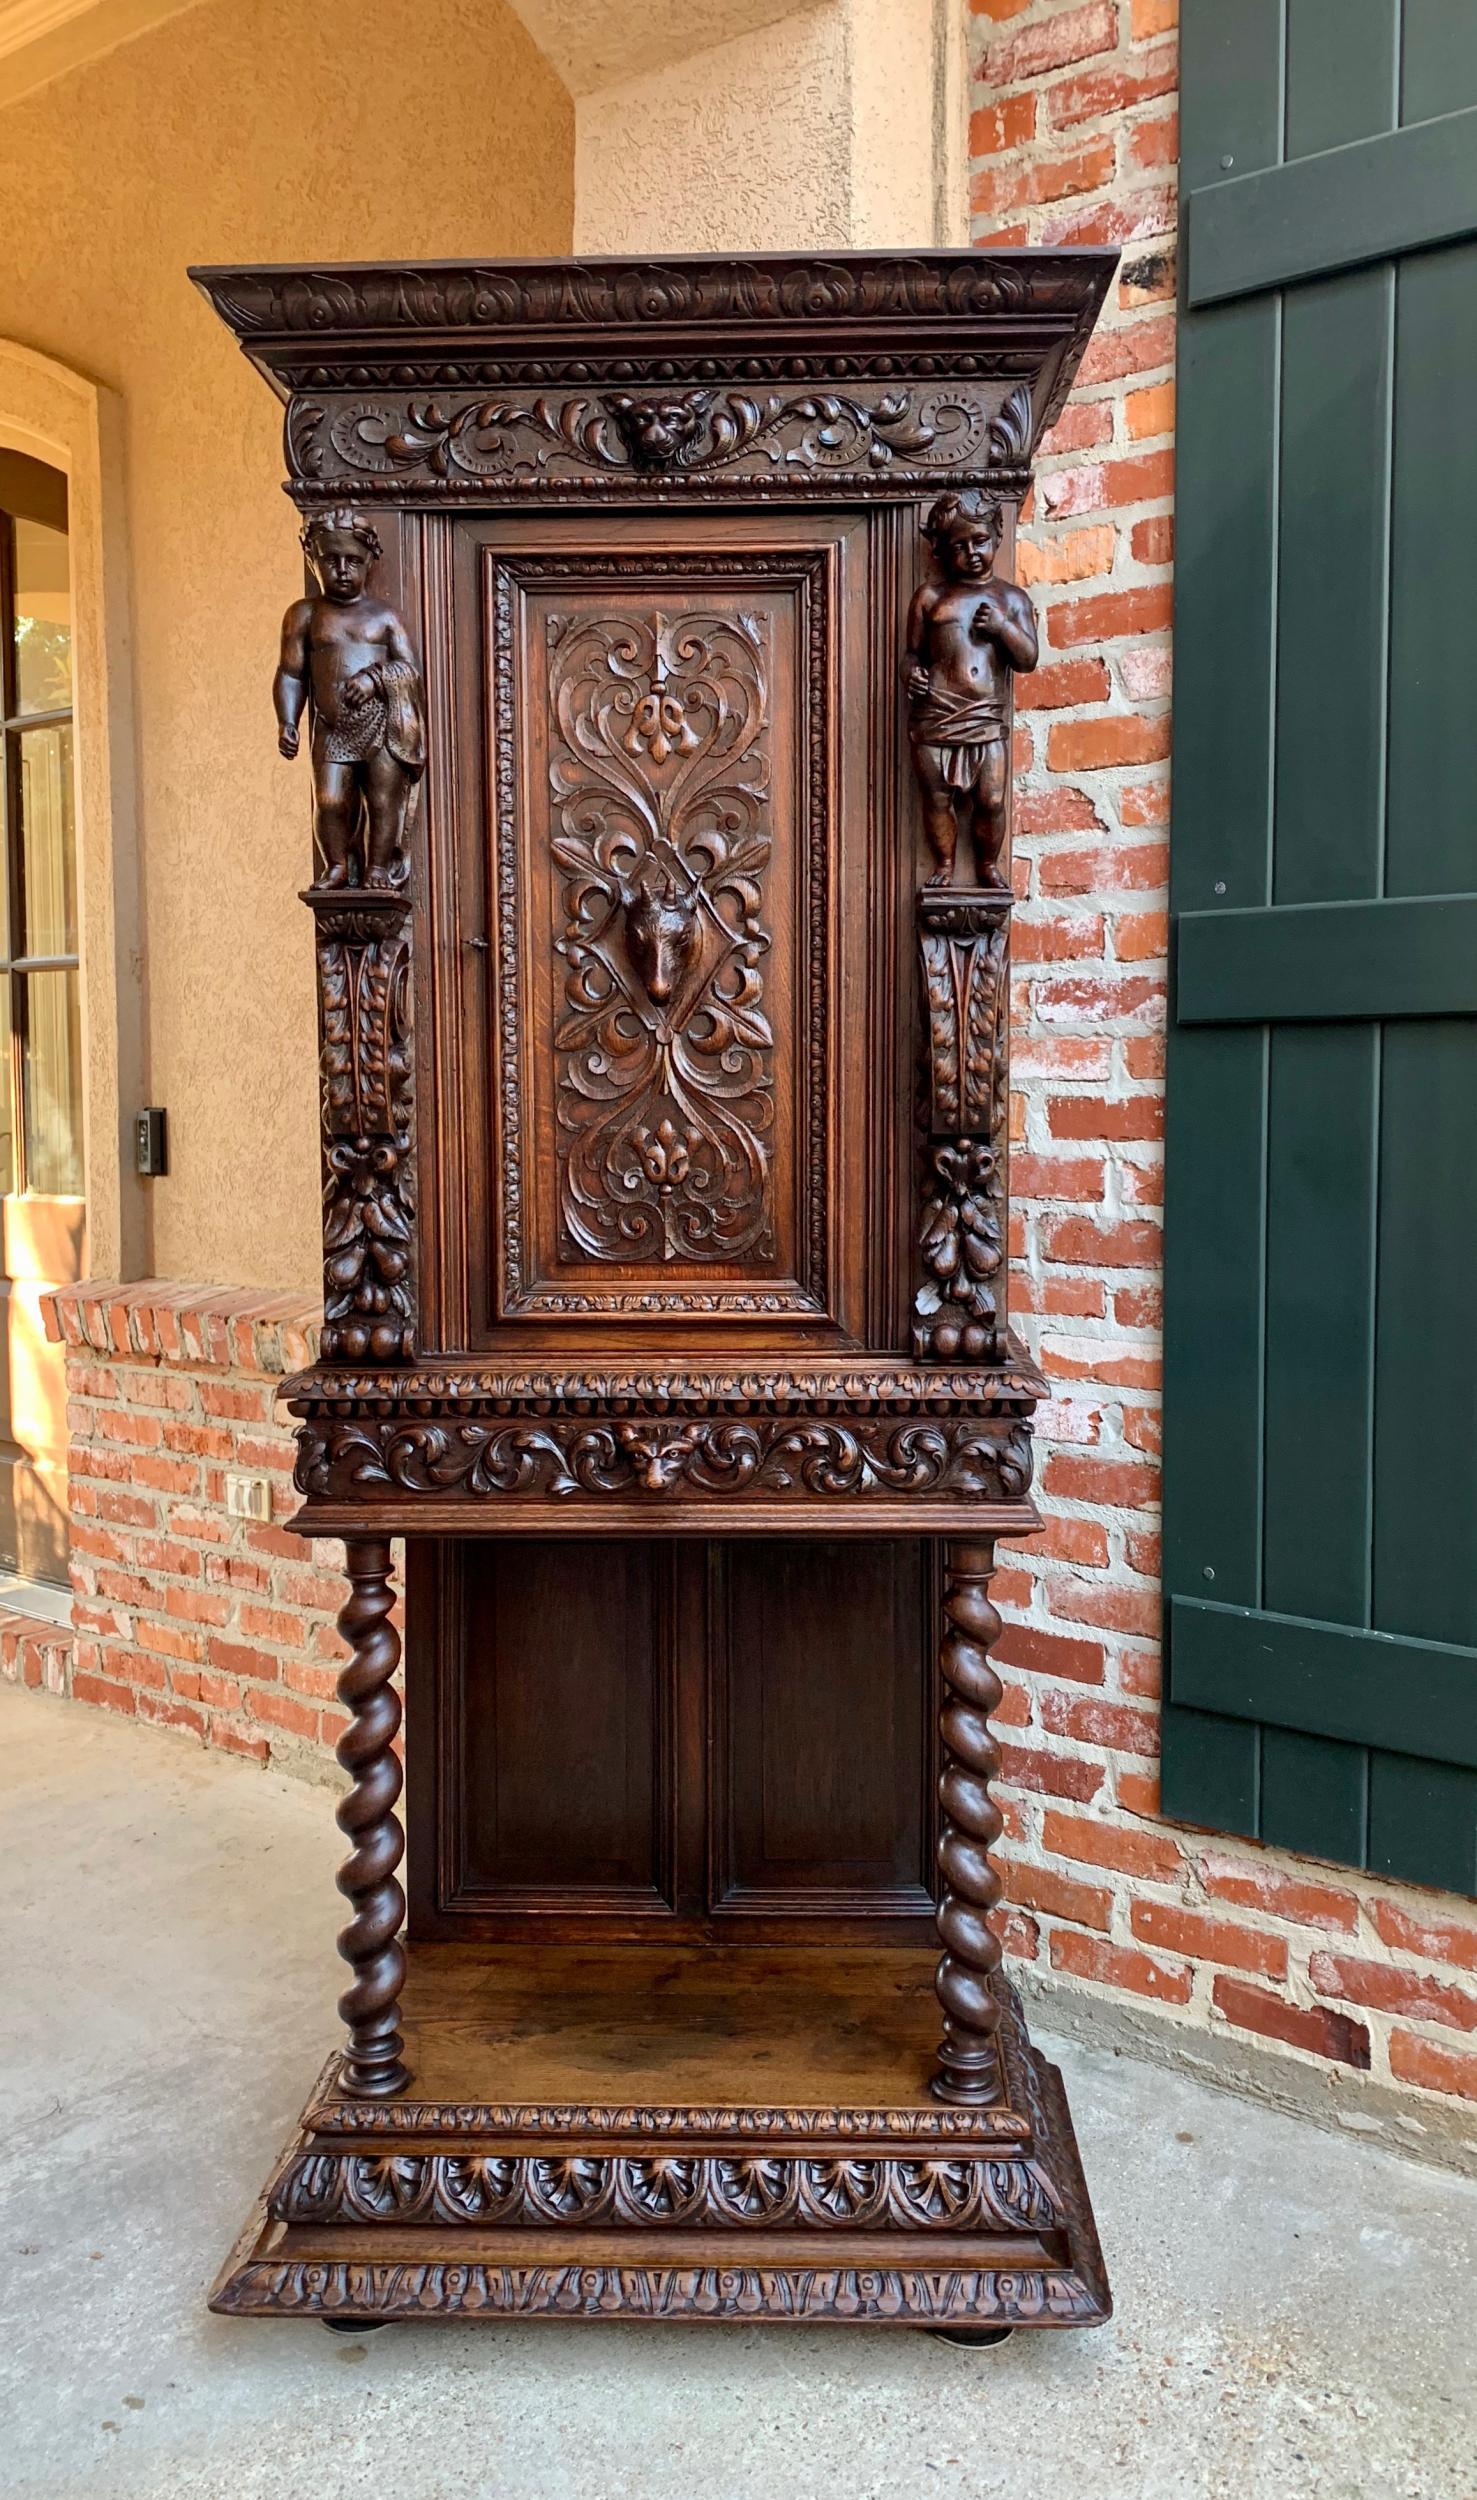 19th century French carved oak Gothic cabinet sacristy vestry barley twist

~Direct from France~
~Stunning antique French oak vestment/sacristy cabinet, obviously a specially commissioned piece, with outstanding craftsmanship~
~Upper cabinet